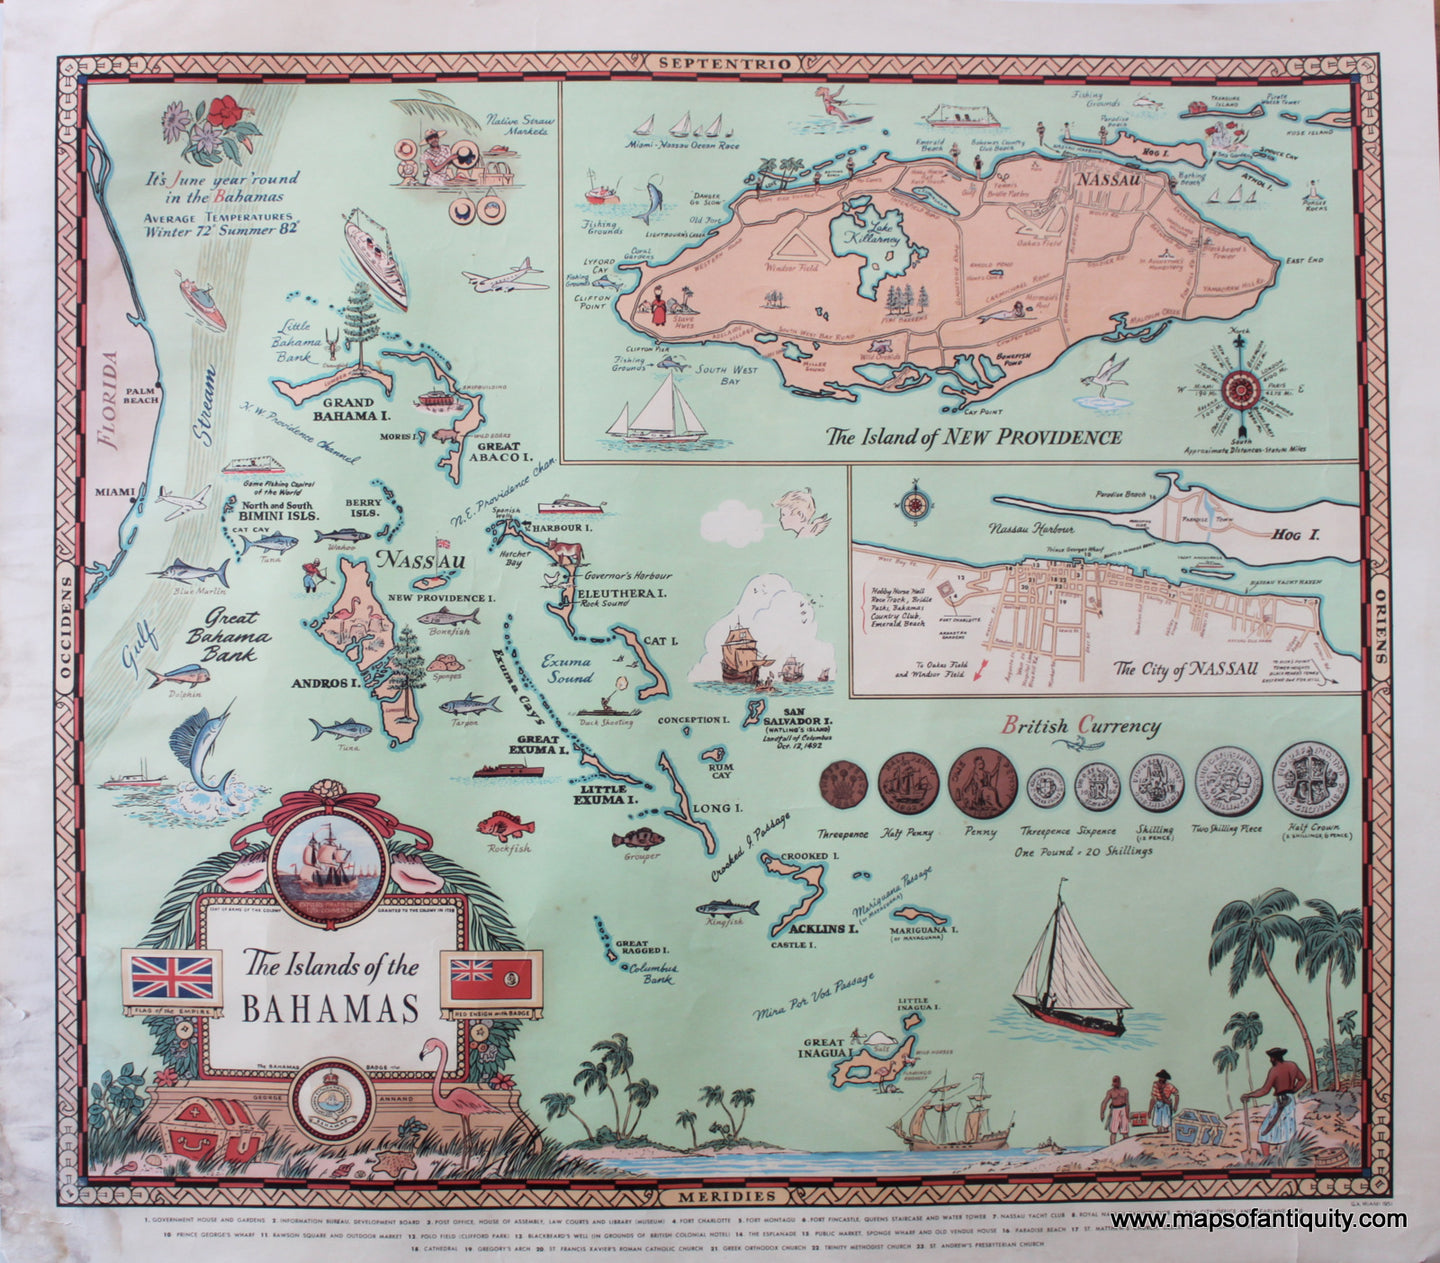 Antique-Map-The-Islands-of-the-Bahamas-Map-George-Annand-1951-1950s-Maps-of-Antiquity